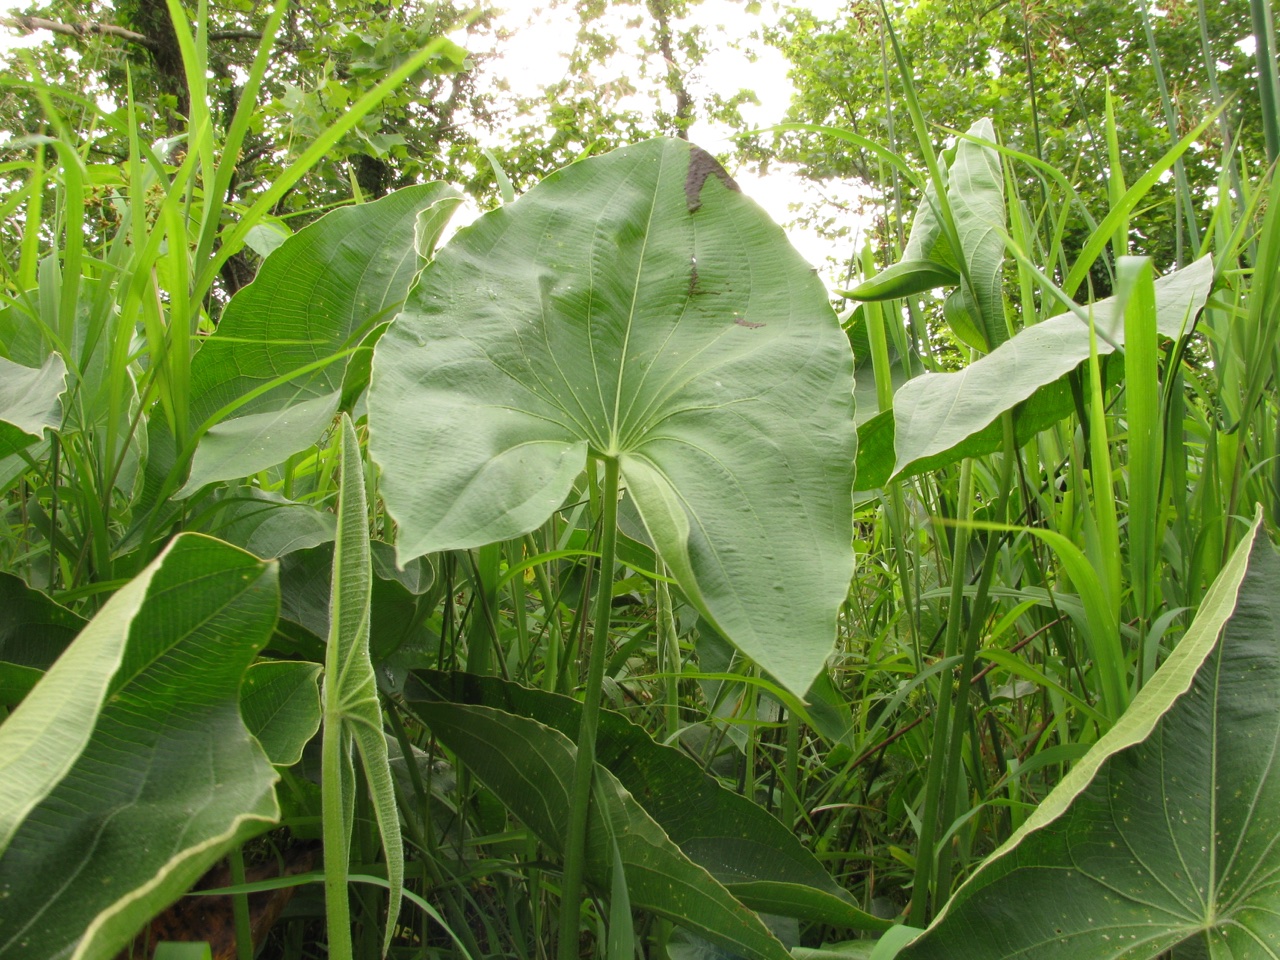 The Scientific Name is Sagittaria latifolia. You will likely hear them called Broadleaf Arrowhead, Duck-potato. This picture shows the Distinctive arrowhead-shaped leaf blade of Sagittaria latifolia